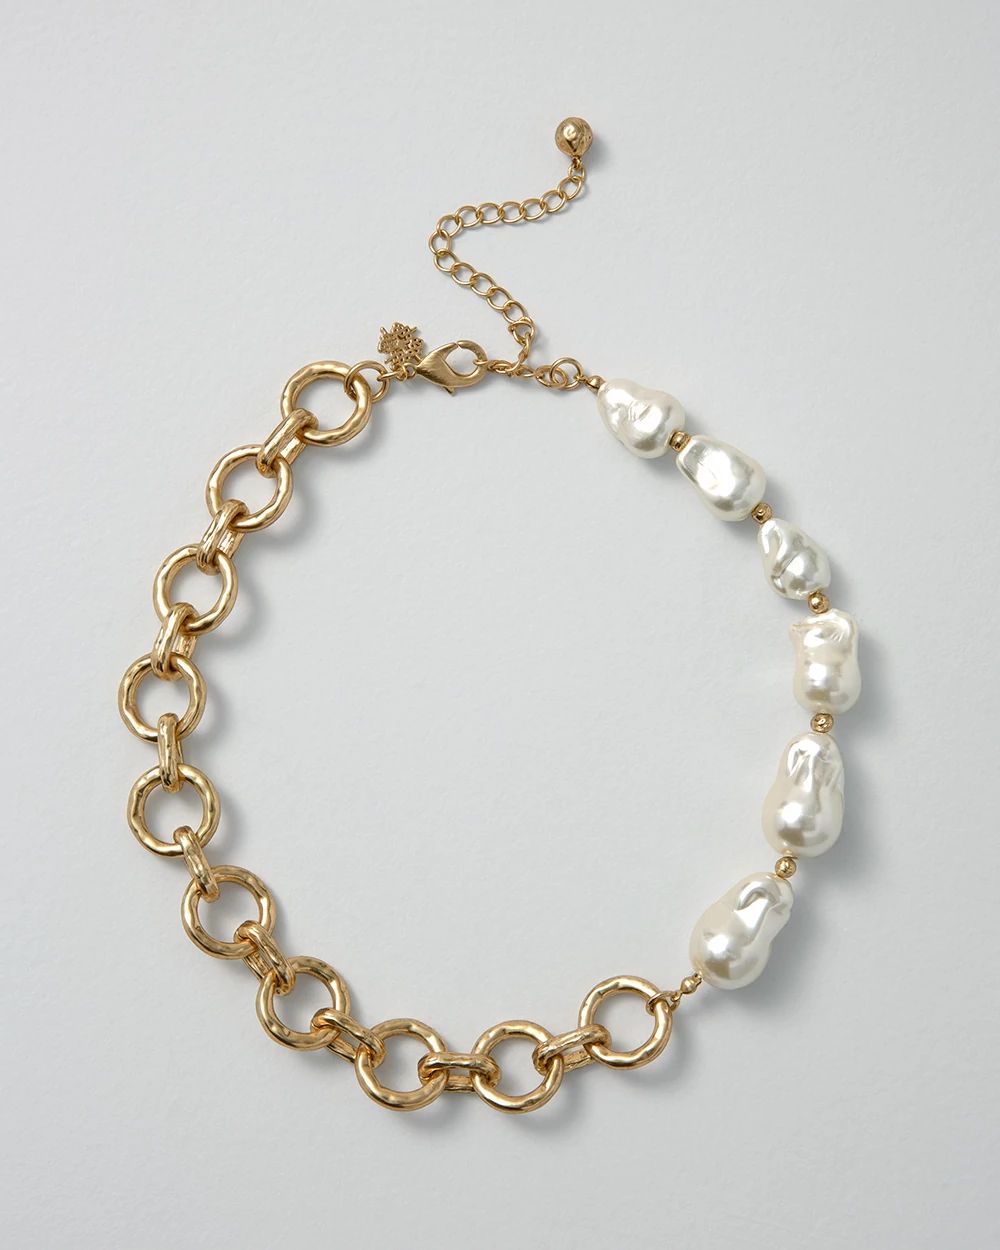 Goldtone Chain & Faux Pearl Necklace click to view larger image.